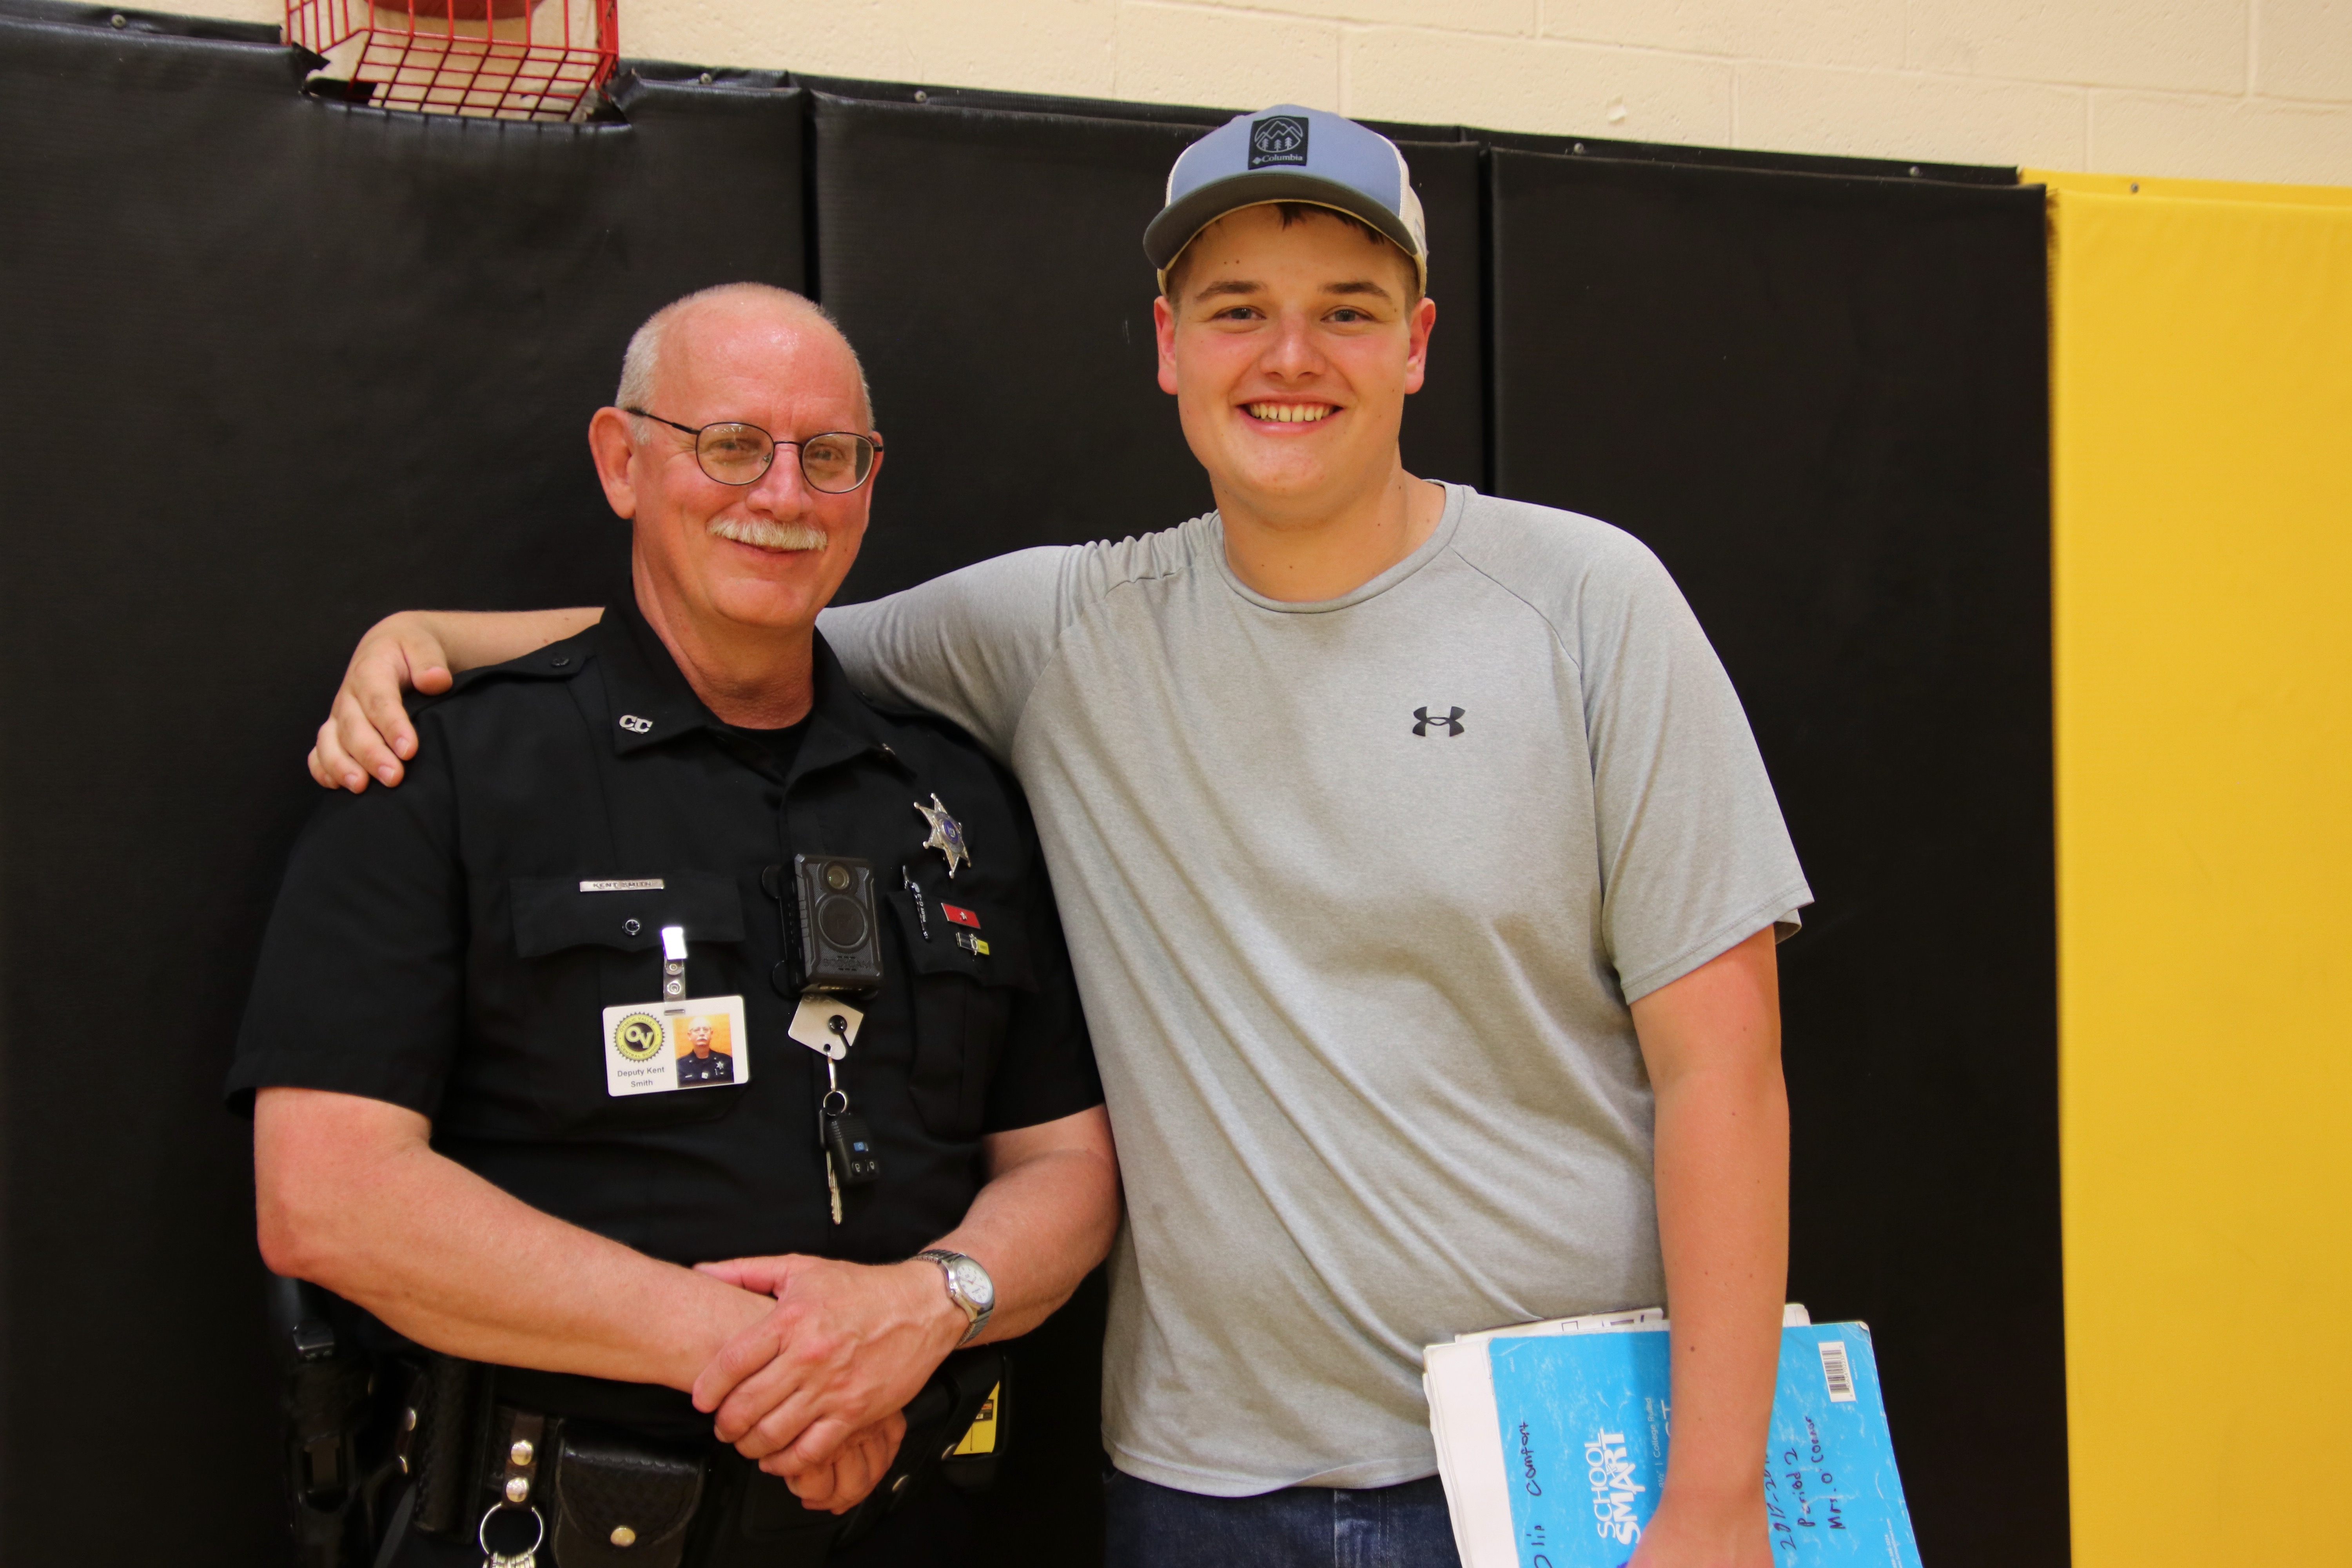 A school resource officer in his police uniform smiles with a high school student